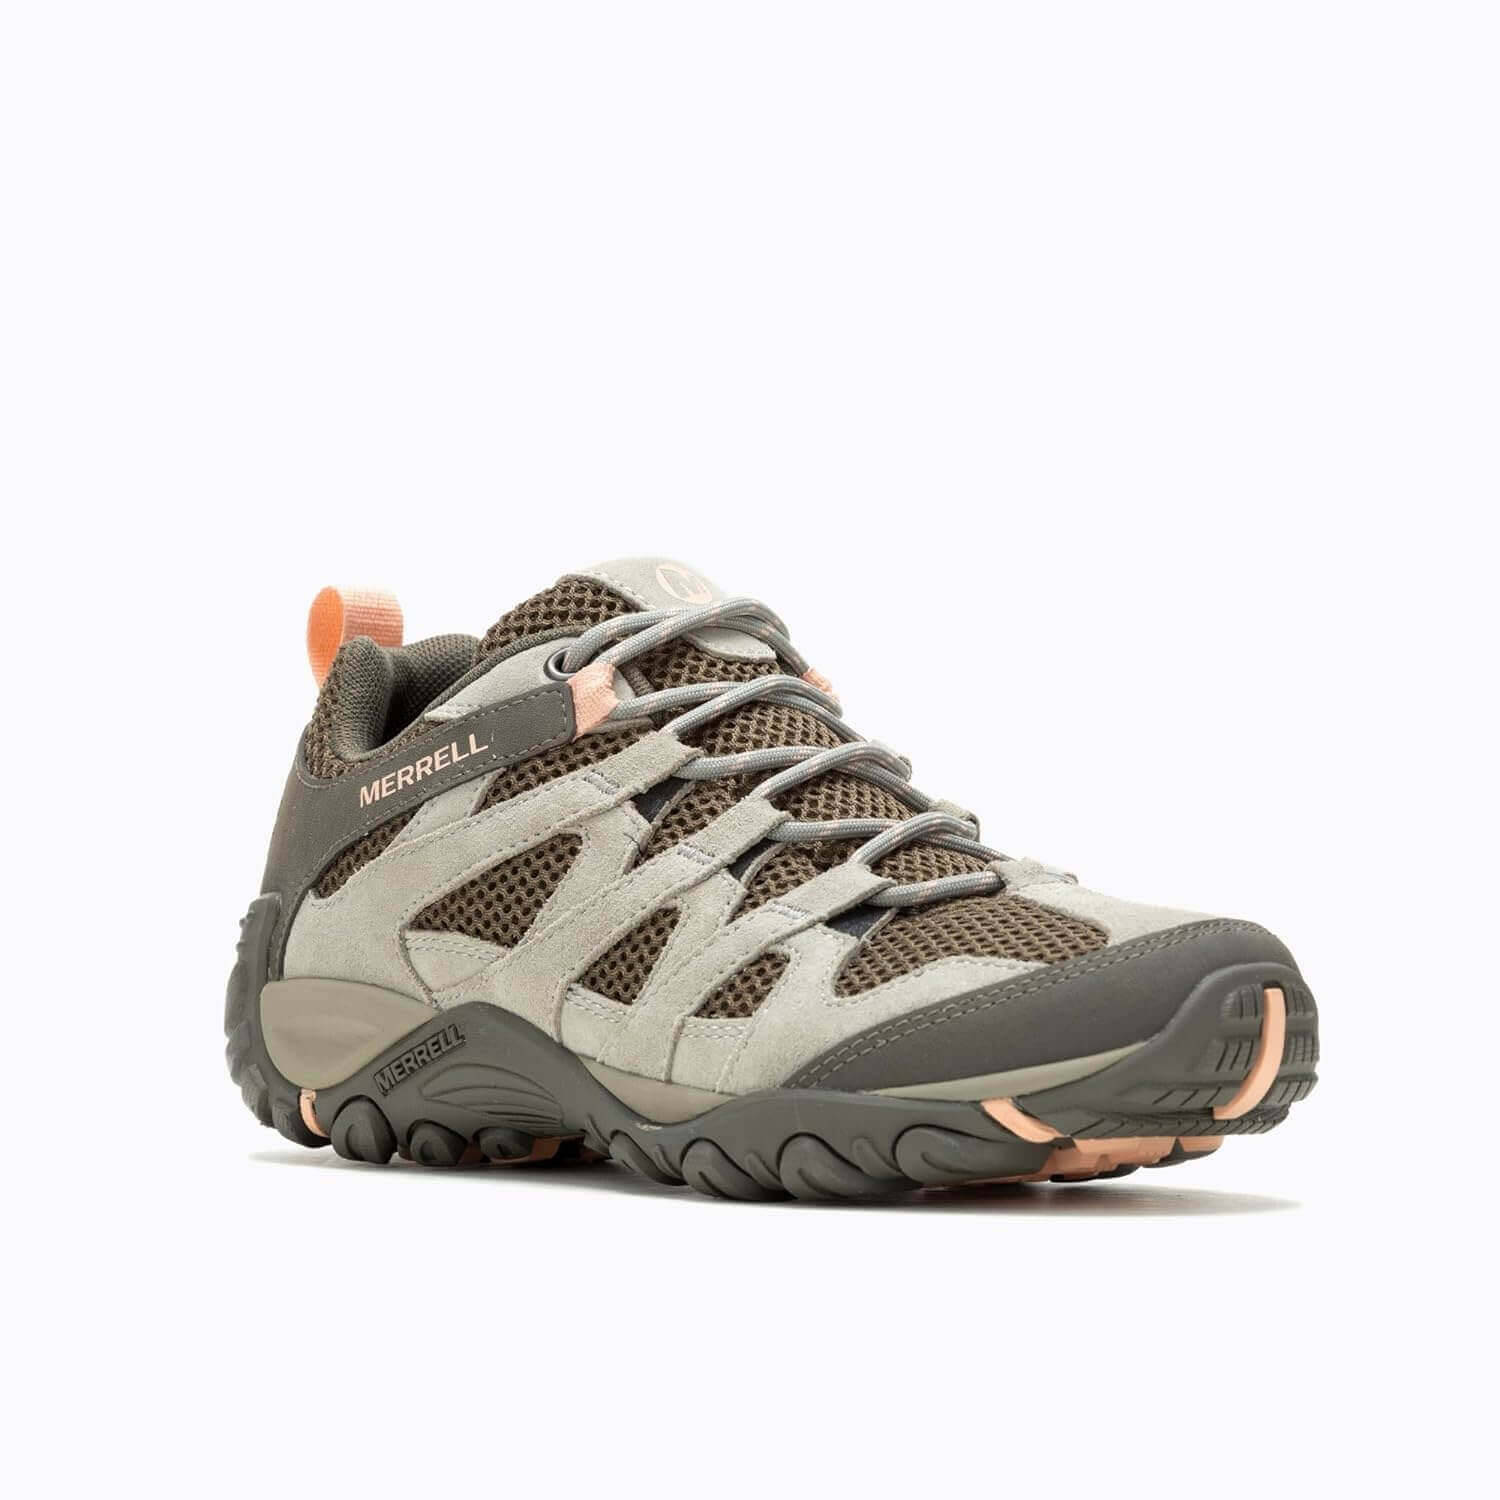 Shop The Latest >Merrell Women's Alverstone Hiking Shoe > *Only $109.20*> From The Top Brand > *Merrelll* > Shop Now and Get Free Shipping On Orders Over $45.00 >*Shop Earth Foot*